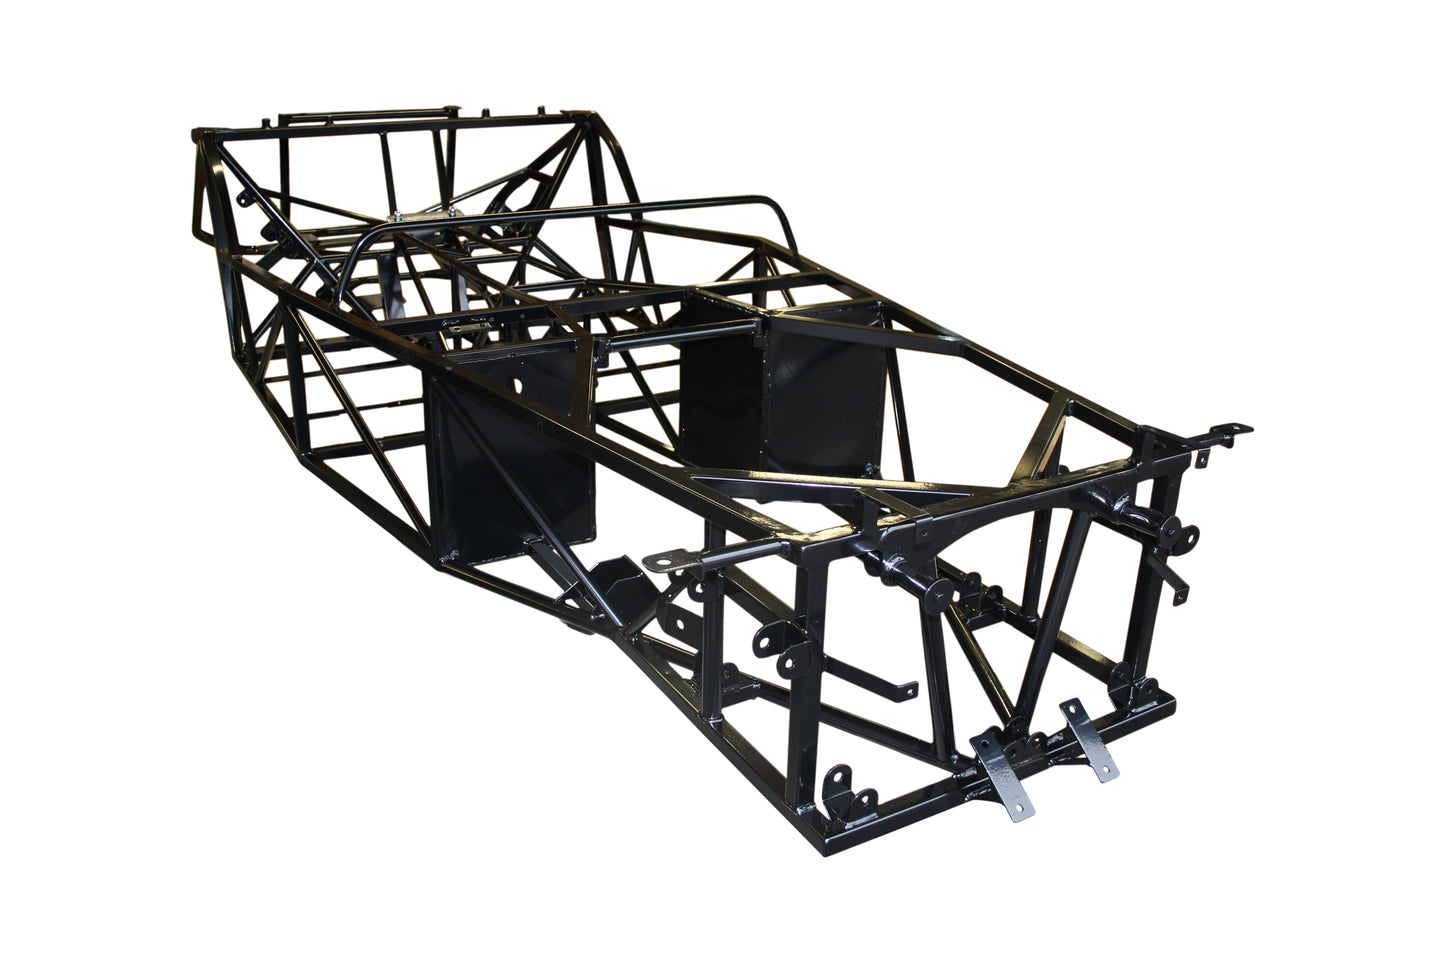 MK Indy RX-5 Chassis